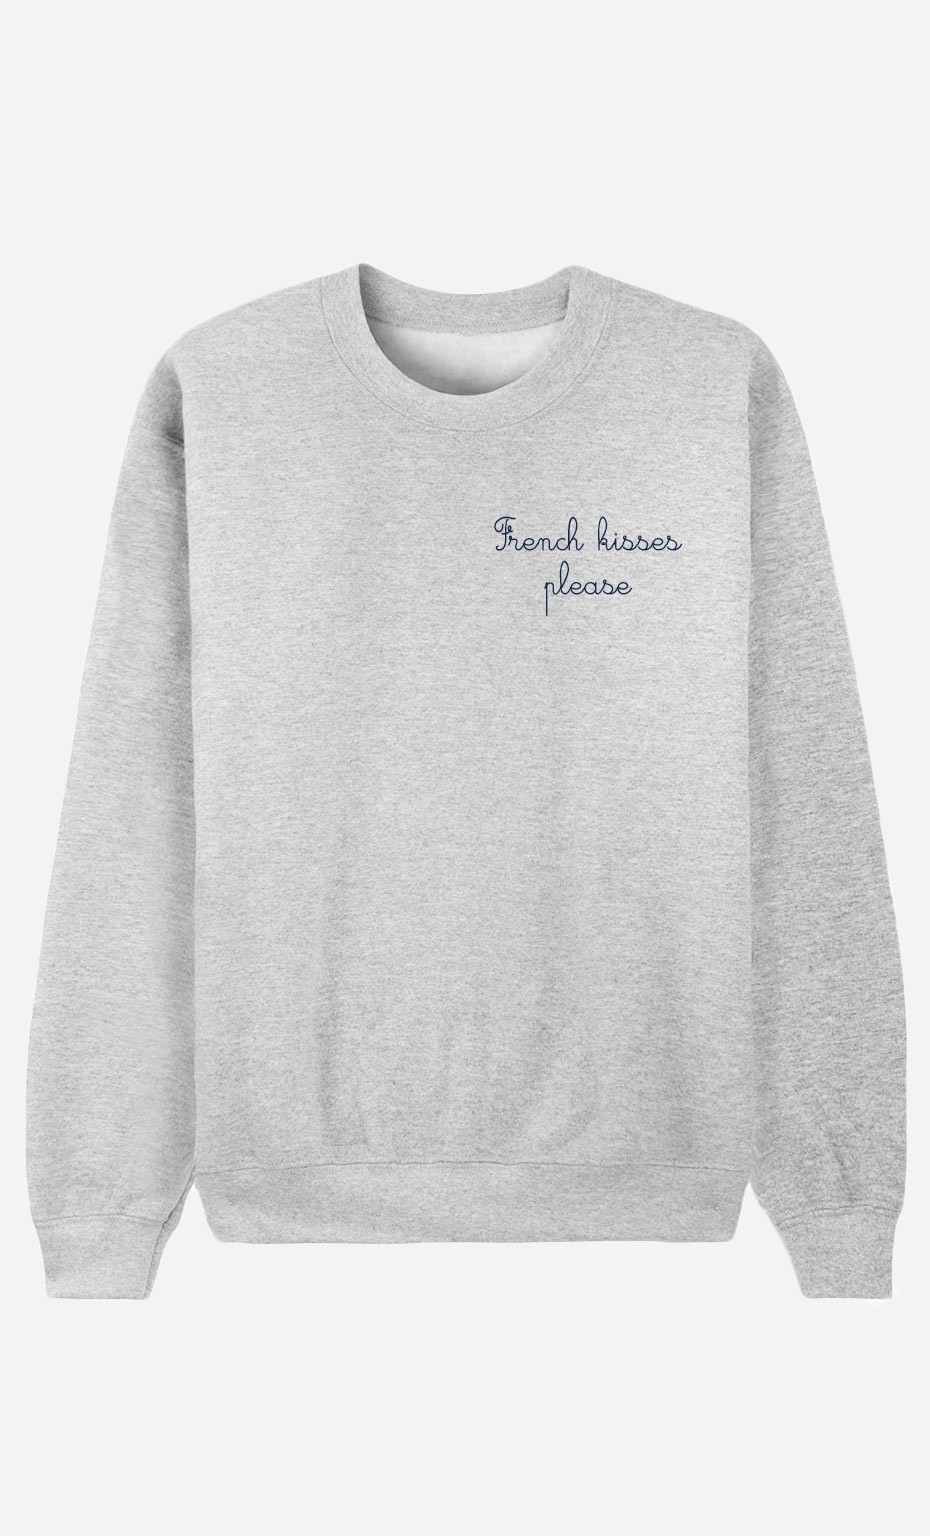 Sweat Homme French Kisses Please - Brodé